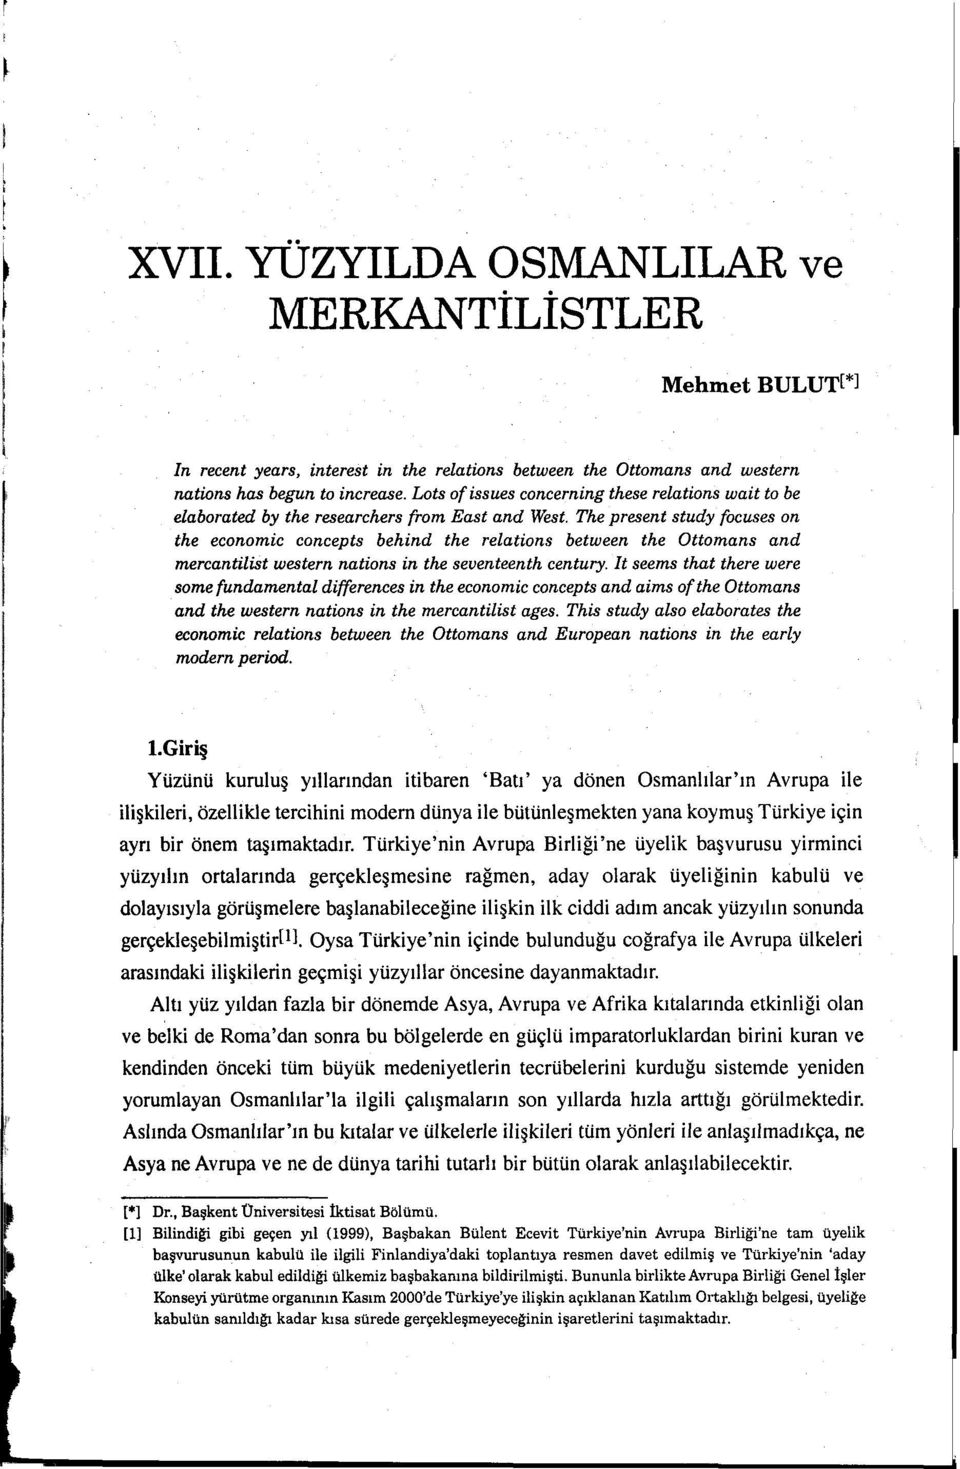 The present study focuses on the economic concepts behind the relations between the Ottomans and mercantilist western nations in the seventeenth century.